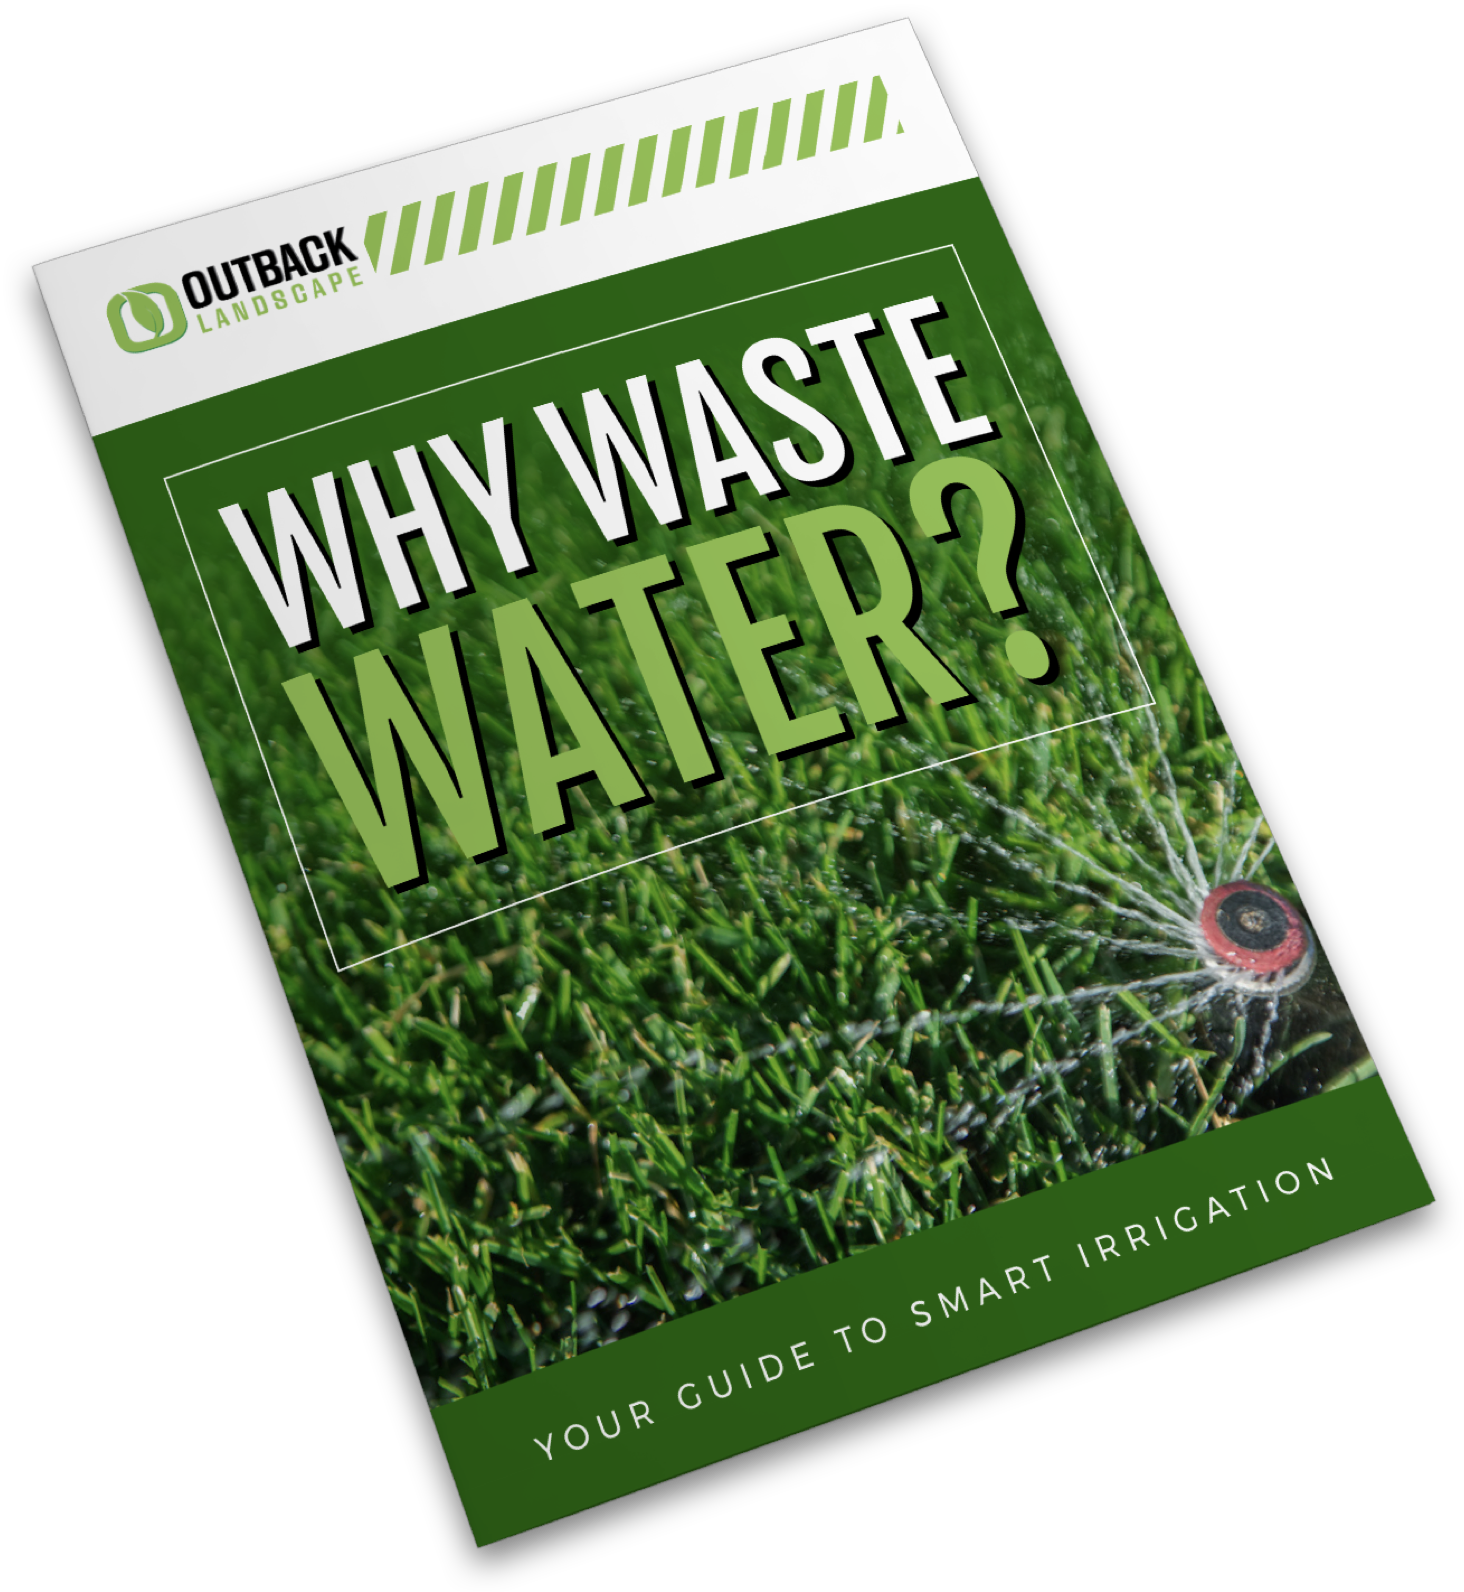 why waste water